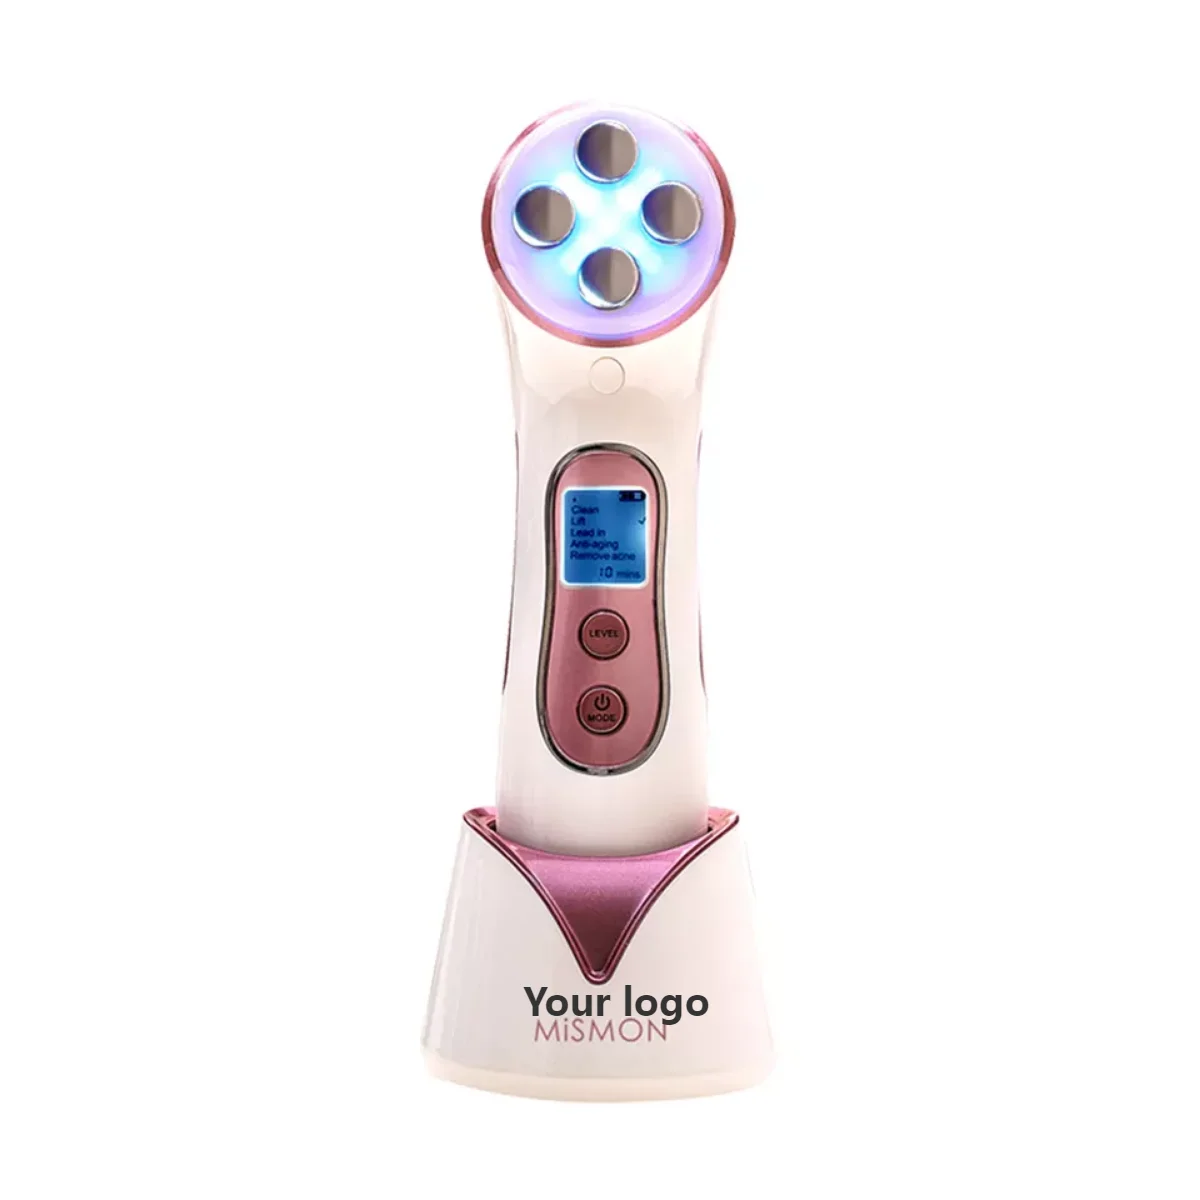 5 In 1 Multifunction Handheld Beauty Gadget For Home Use multifunctional beauty equipment